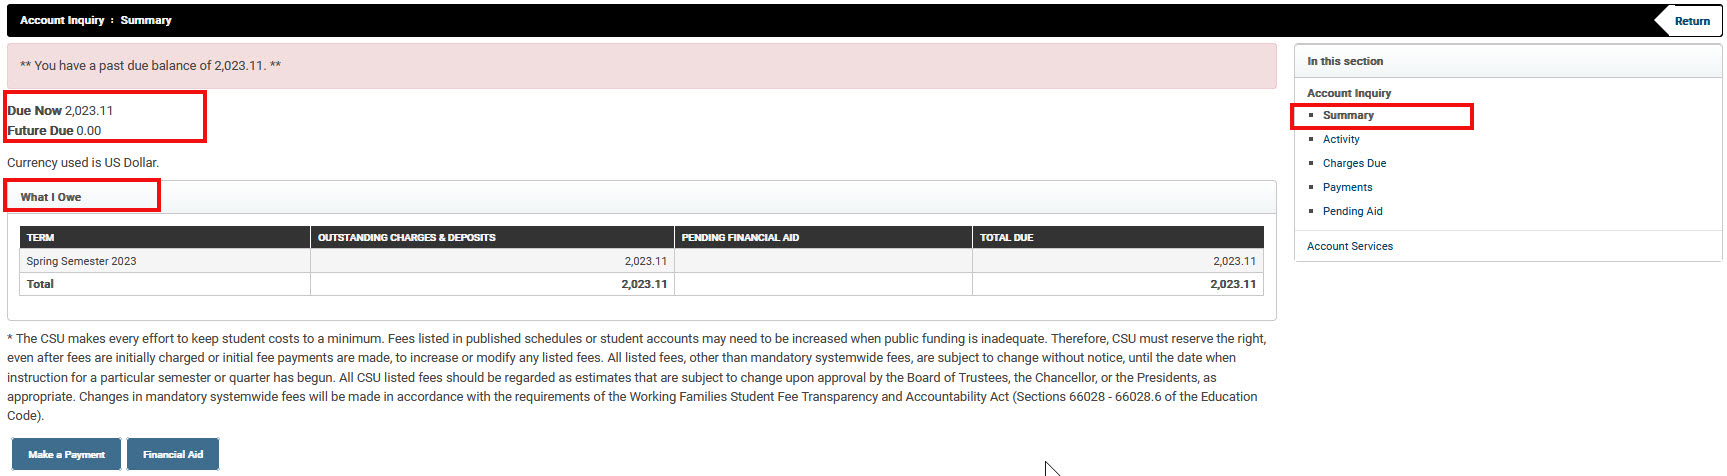 image of account inquiry summary page in broncodirect - summary in navigation box is highlighted as is the amount due now